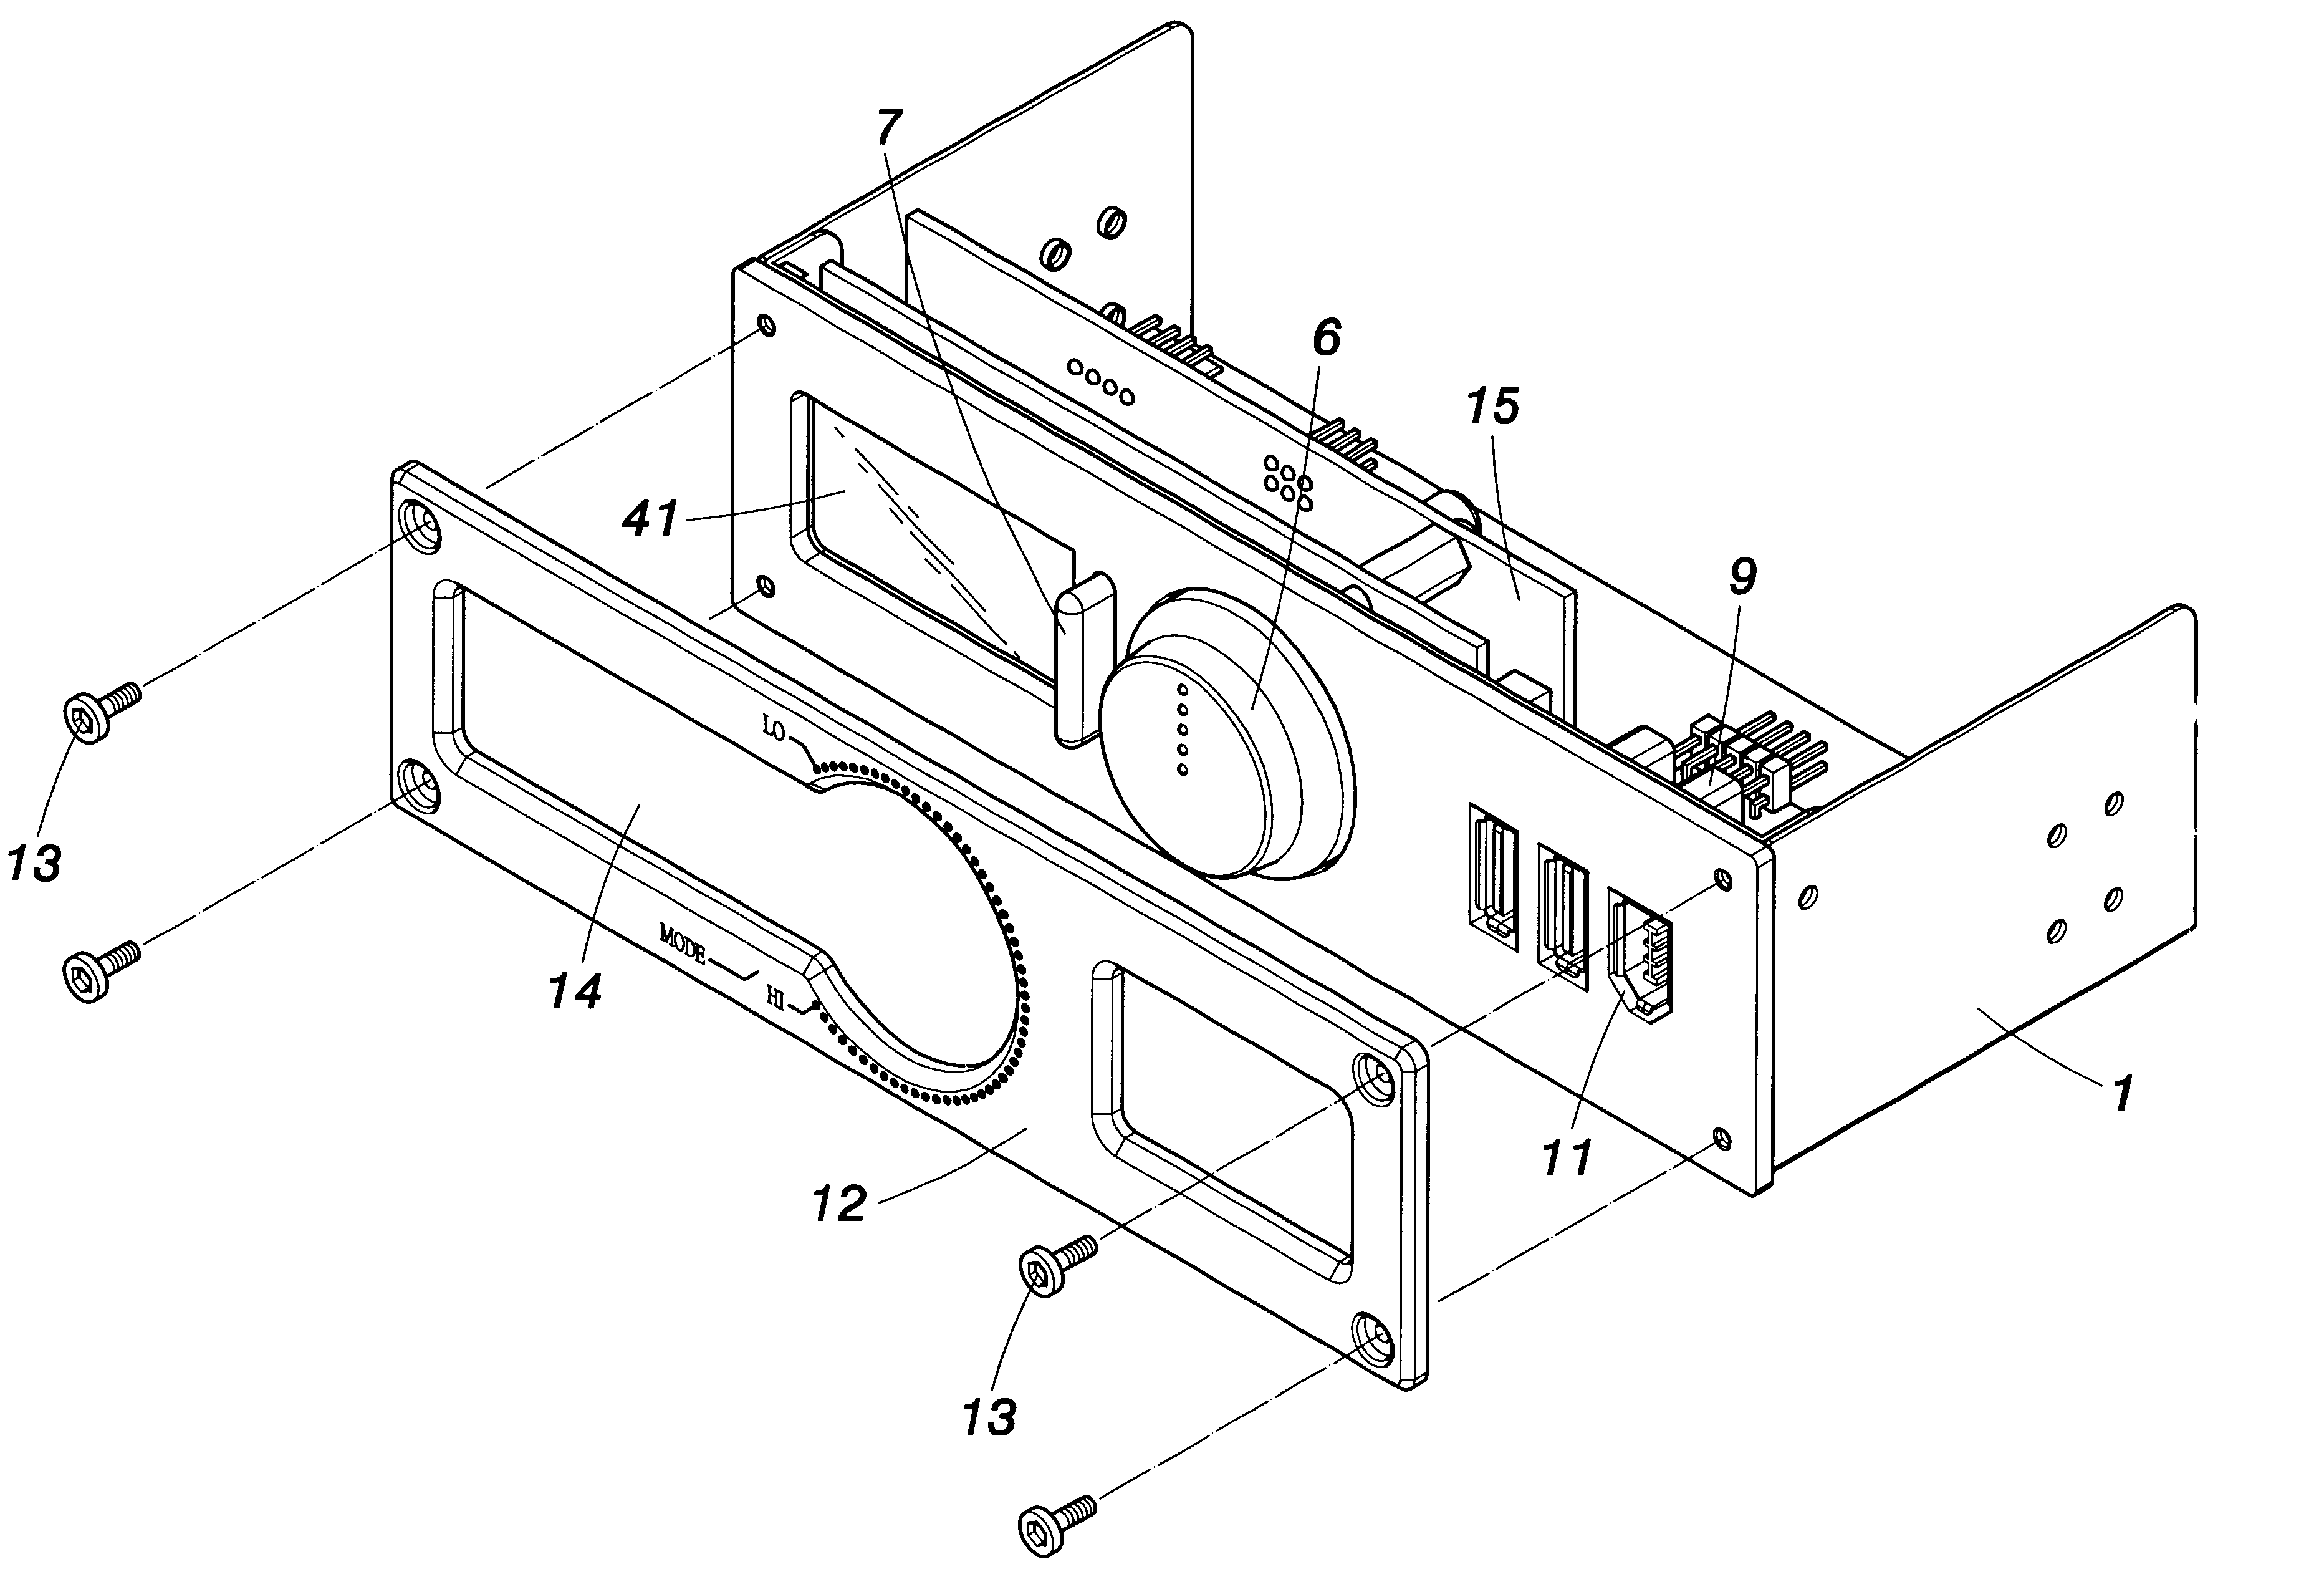 Assembly of computer peripherals